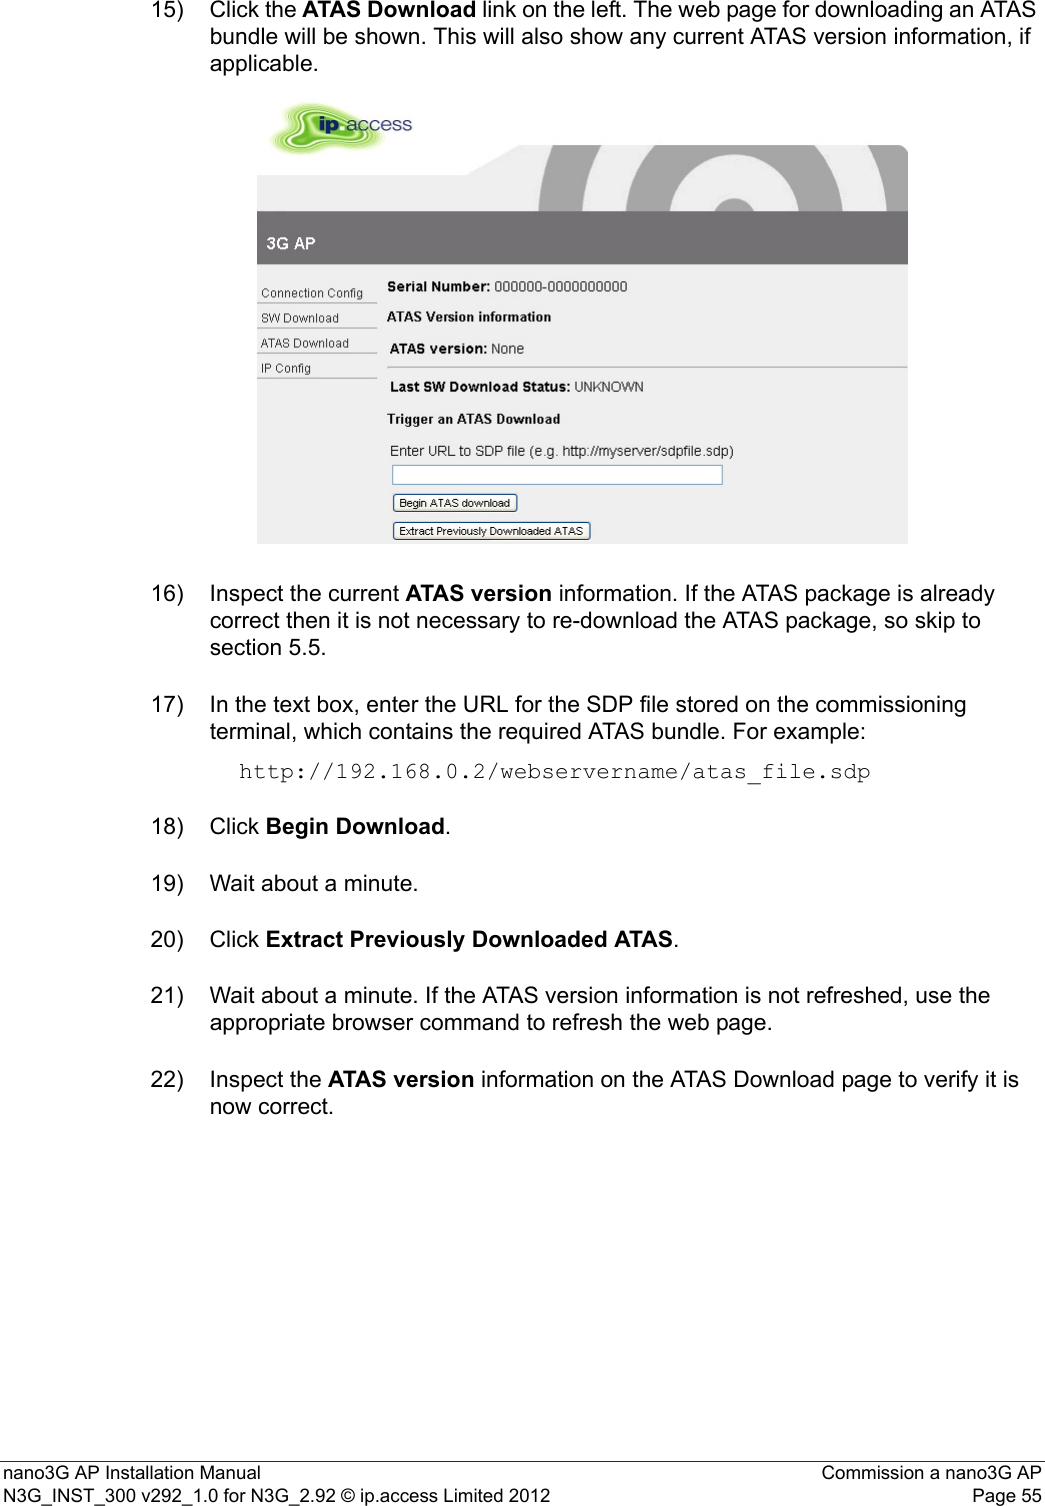 nano3G AP Installation Manual Commission a nano3G APN3G_INST_300 v292_1.0 for N3G_2.92 © ip.access Limited 2012 Page 5515) Click the ATAS Download link on the left. The web page for downloading an ATAS bundle will be shown. This will also show any current ATAS version information, if applicable.16) Inspect the current ATAS version information. If the ATAS package is already correct then it is not necessary to re-download the ATAS package, so skip to section 5.5. 17) In the text box, enter the URL for the SDP file stored on the commissioning terminal, which contains the required ATAS bundle. For example: http://192.168.0.2/webservername/atas_file.sdp18) Click Begin Download. 19) Wait about a minute.20) Click Extract Previously Downloaded ATAS. 21) Wait about a minute. If the ATAS version information is not refreshed, use the appropriate browser command to refresh the web page. 22) Inspect the ATAS version information on the ATAS Download page to verify it is now correct.